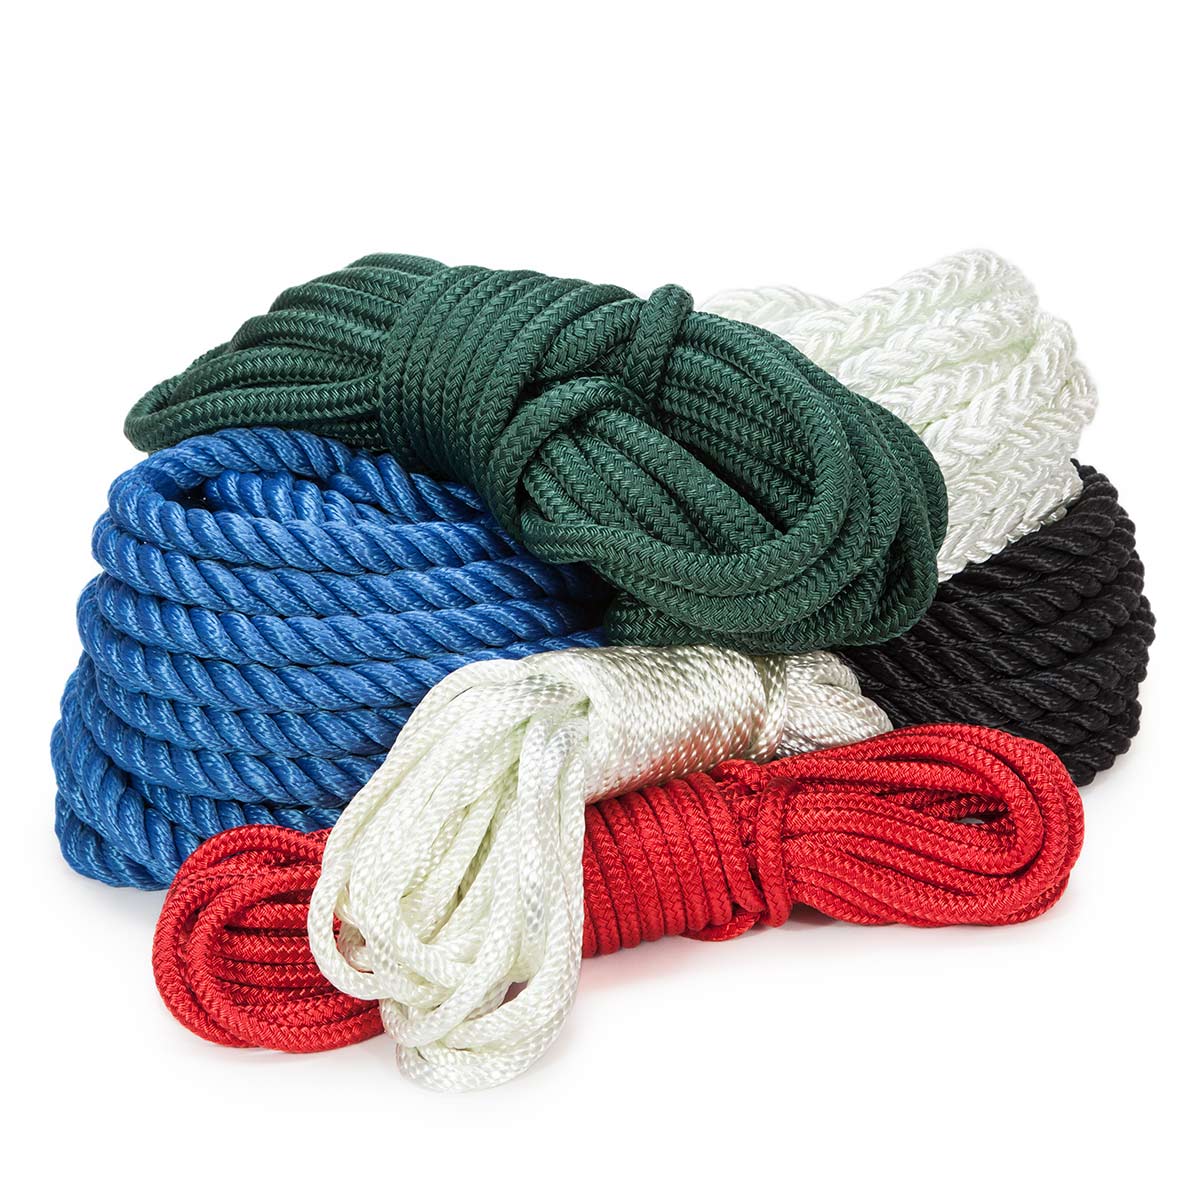 Lehigh 1/4-in x 50-ft Braided Nylon Rope in the Packaged Rope department at